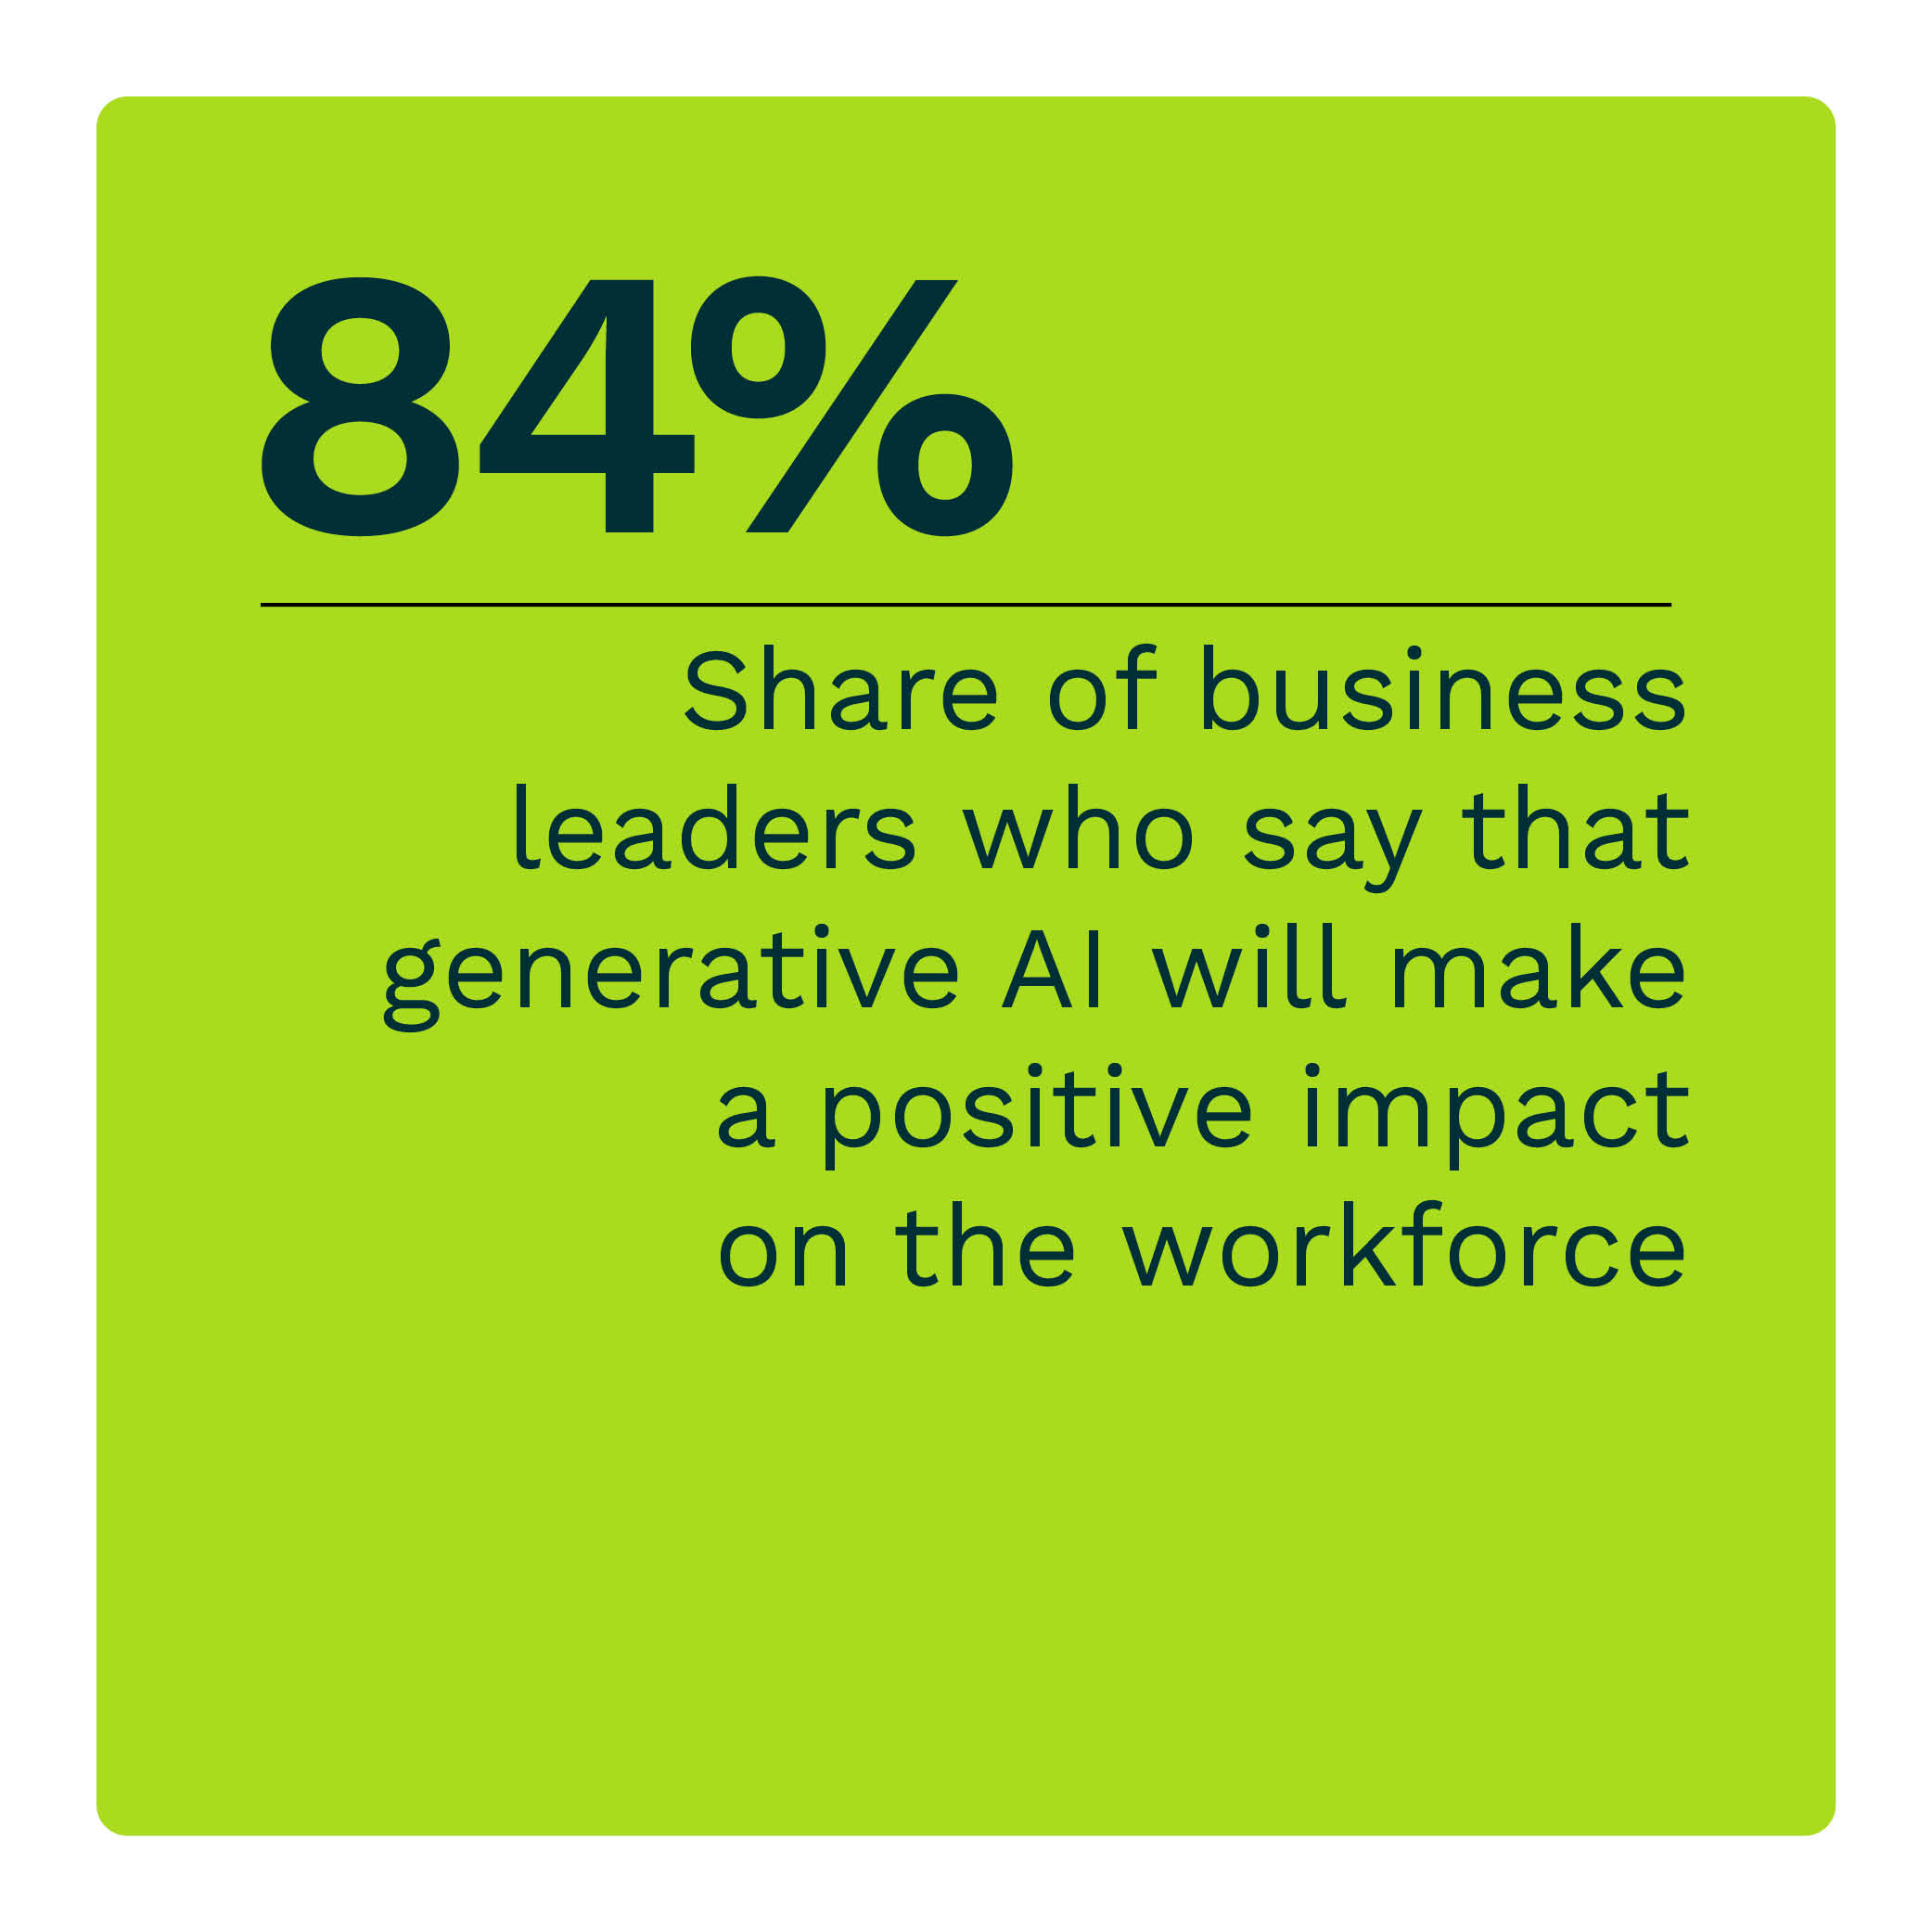 84%: Share of business leaders who say that generative AI will make a positive impact on the workforce